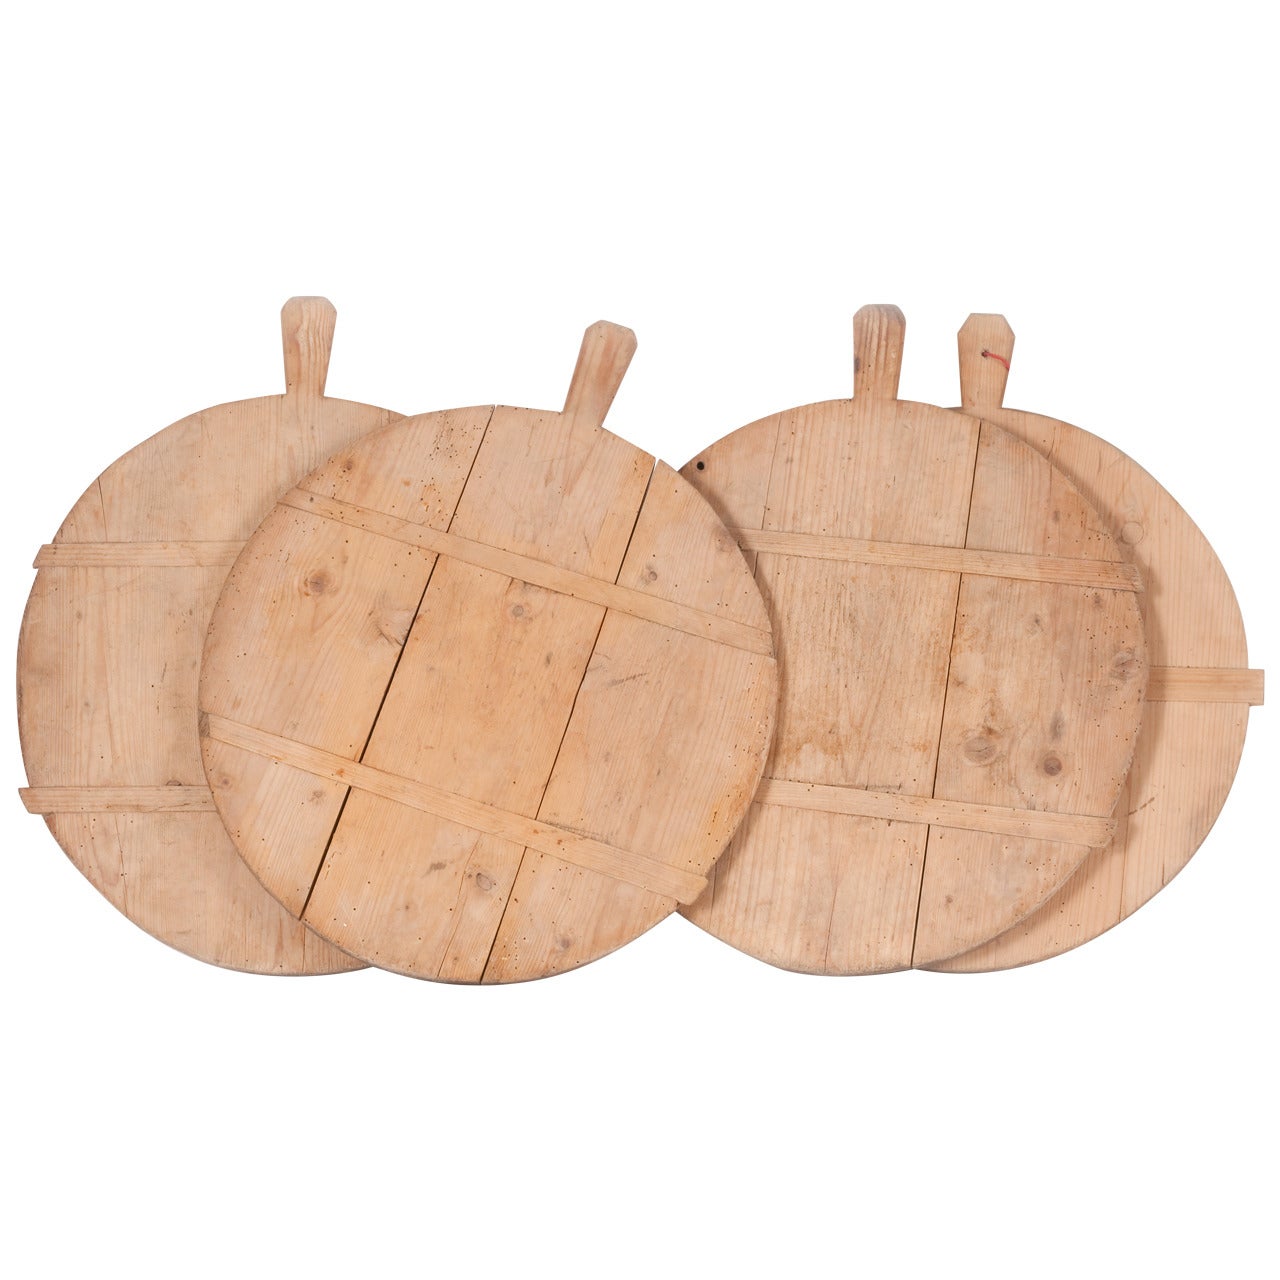 Four French Pine Cheese Boards, First Half 19th Century For Sale